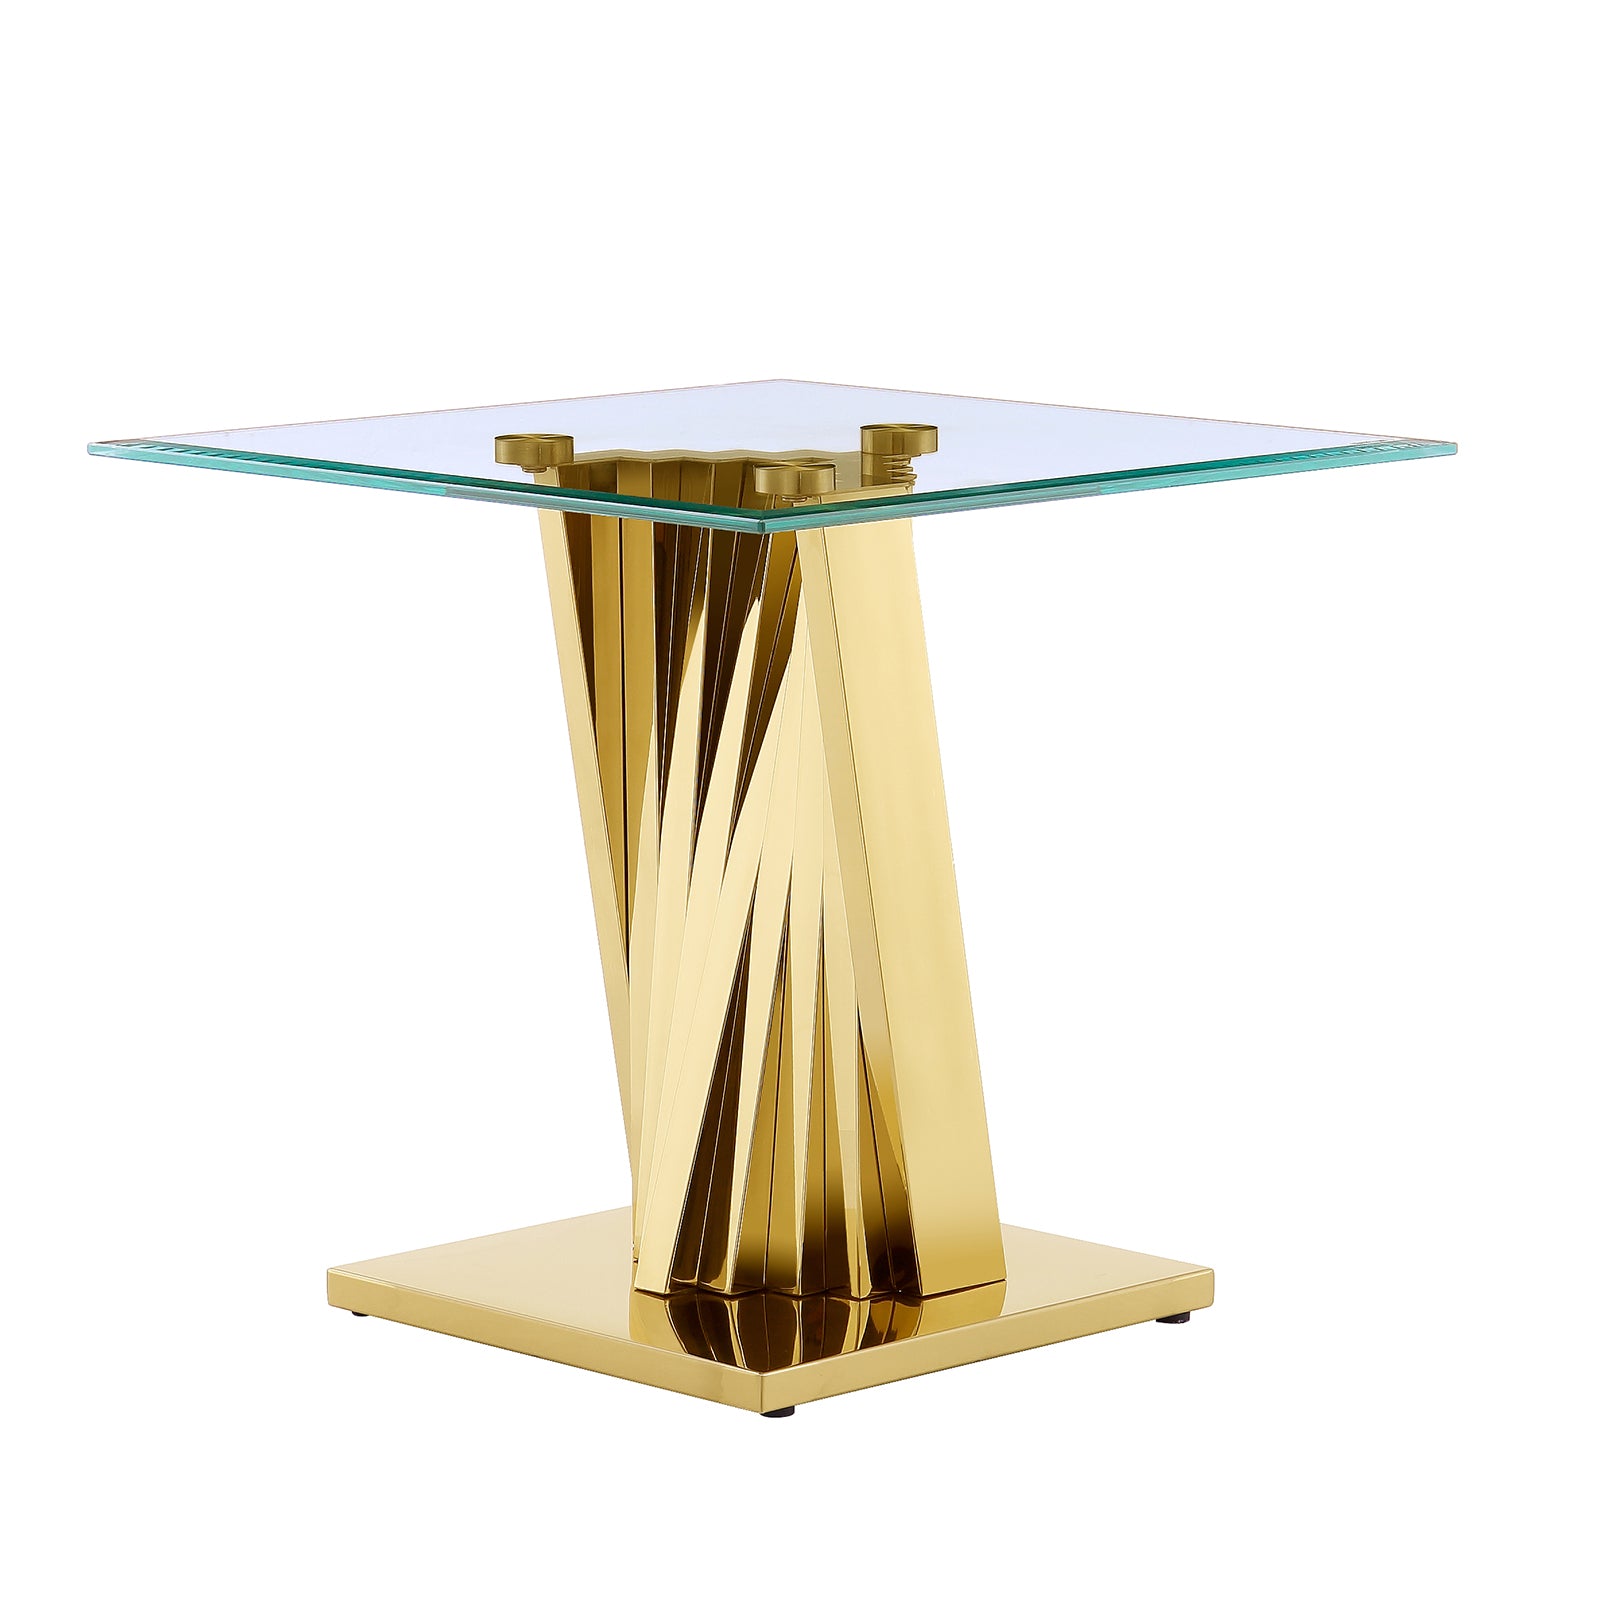 Gold Glass living room table set | Metal Scalloped Legs | L219